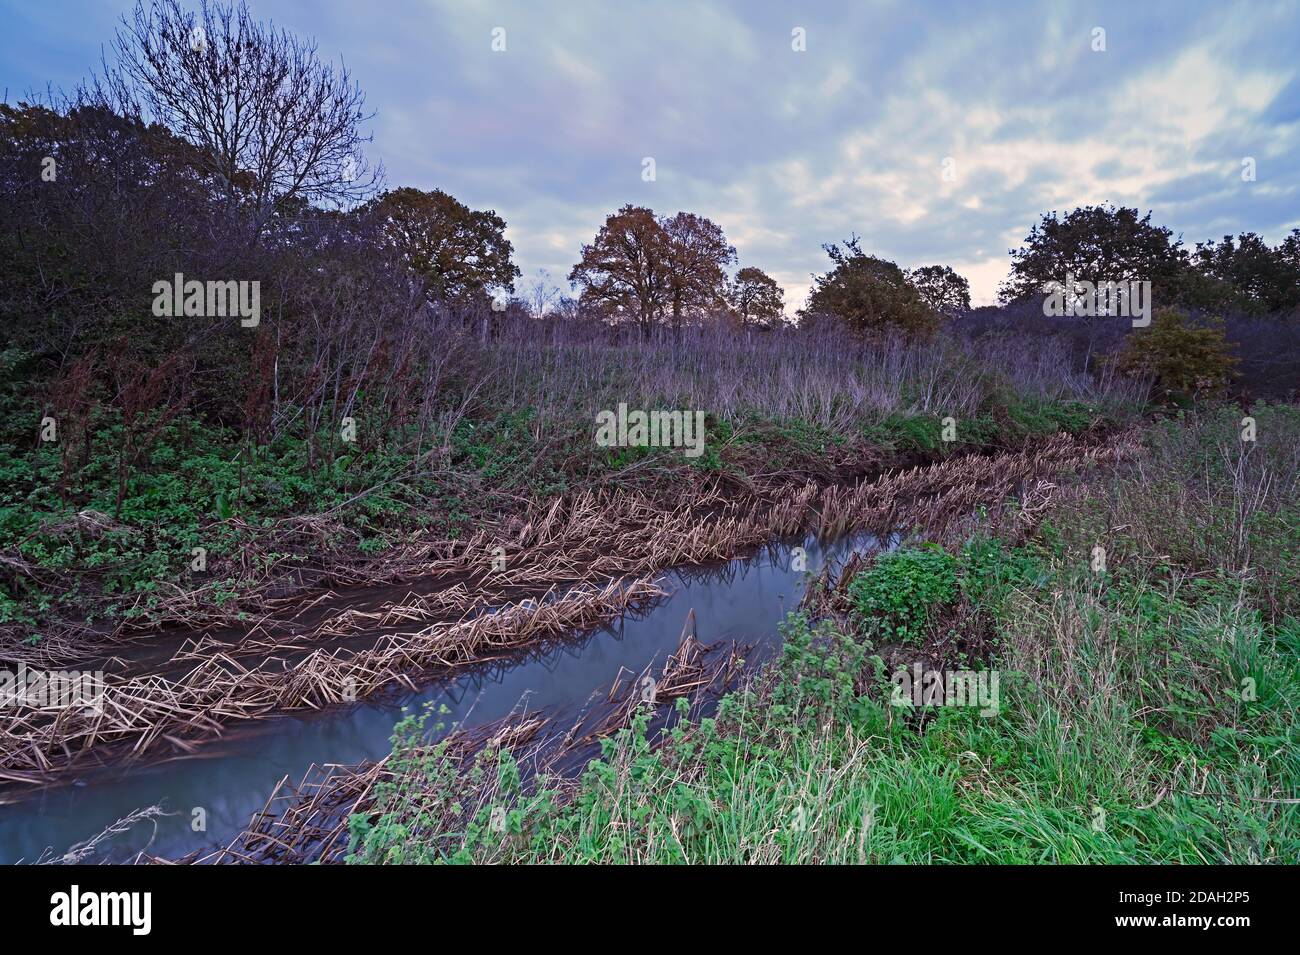 A view of the River Crouch between Castledon Road Bridge and the London Road Bridge at Wickford, Essex. UK Stock Photo